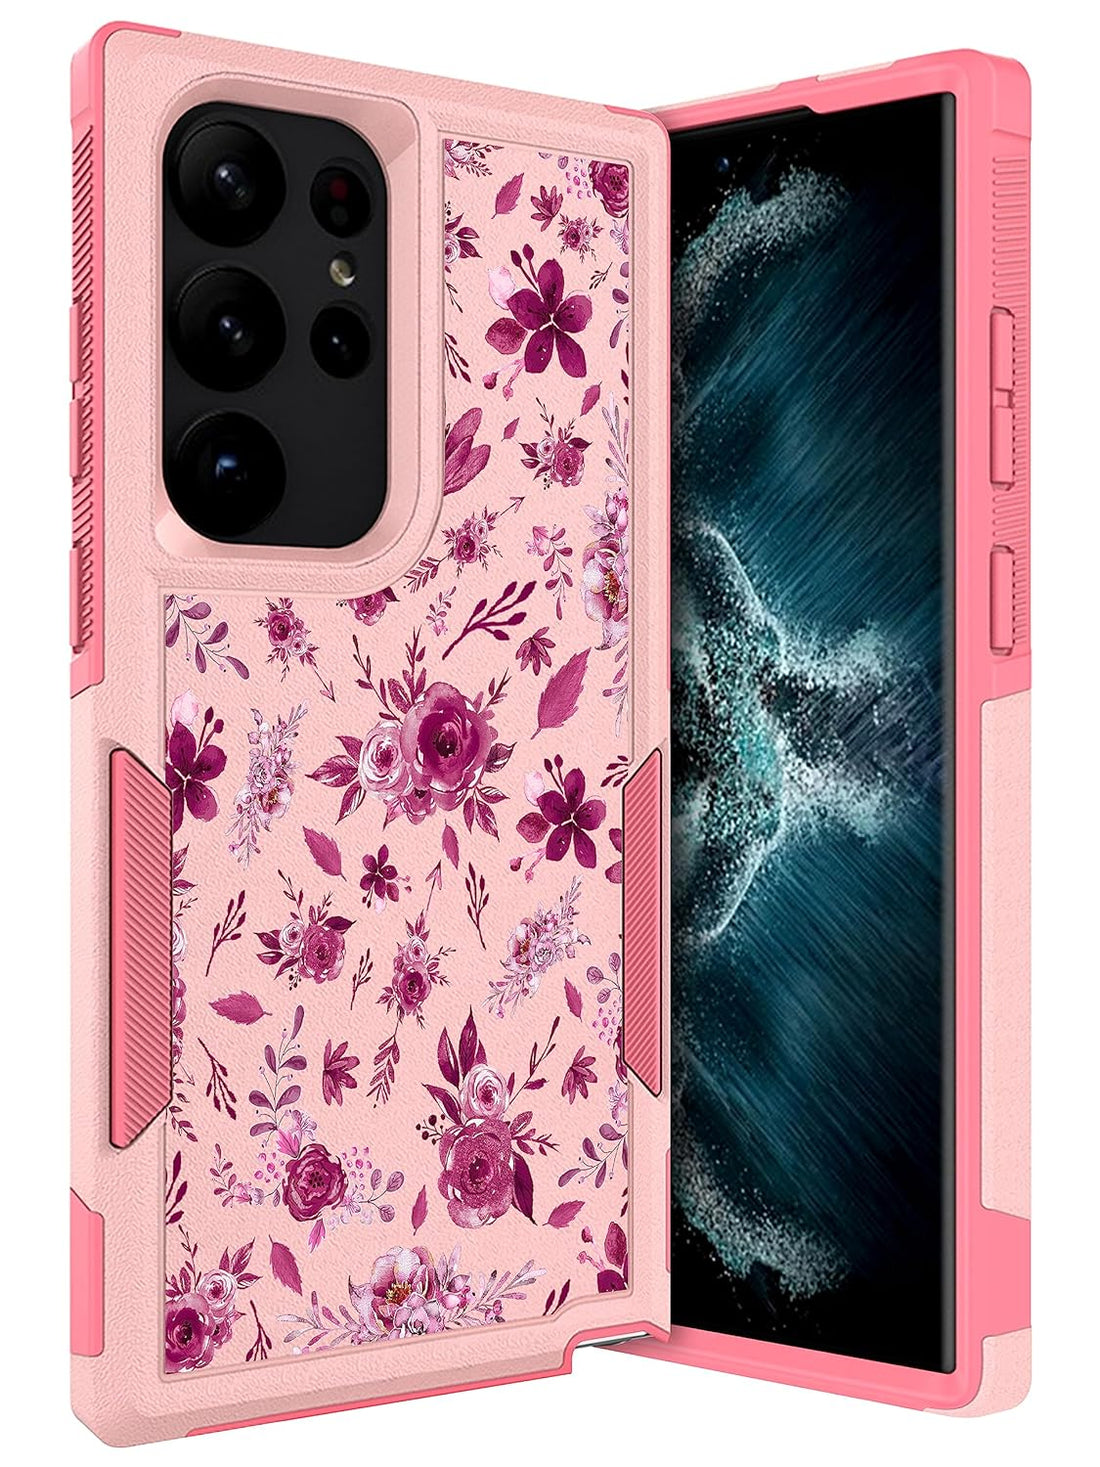 Glisten - Samsung Galaxy S23 Ultra Case, S23 Ultra 5G Case - Floral Burgundy Pattern Design Printed Heavy Duty Military Grade Protection Shockproof Pink Armor Phone Case for S23 Ultra 5G for Girls